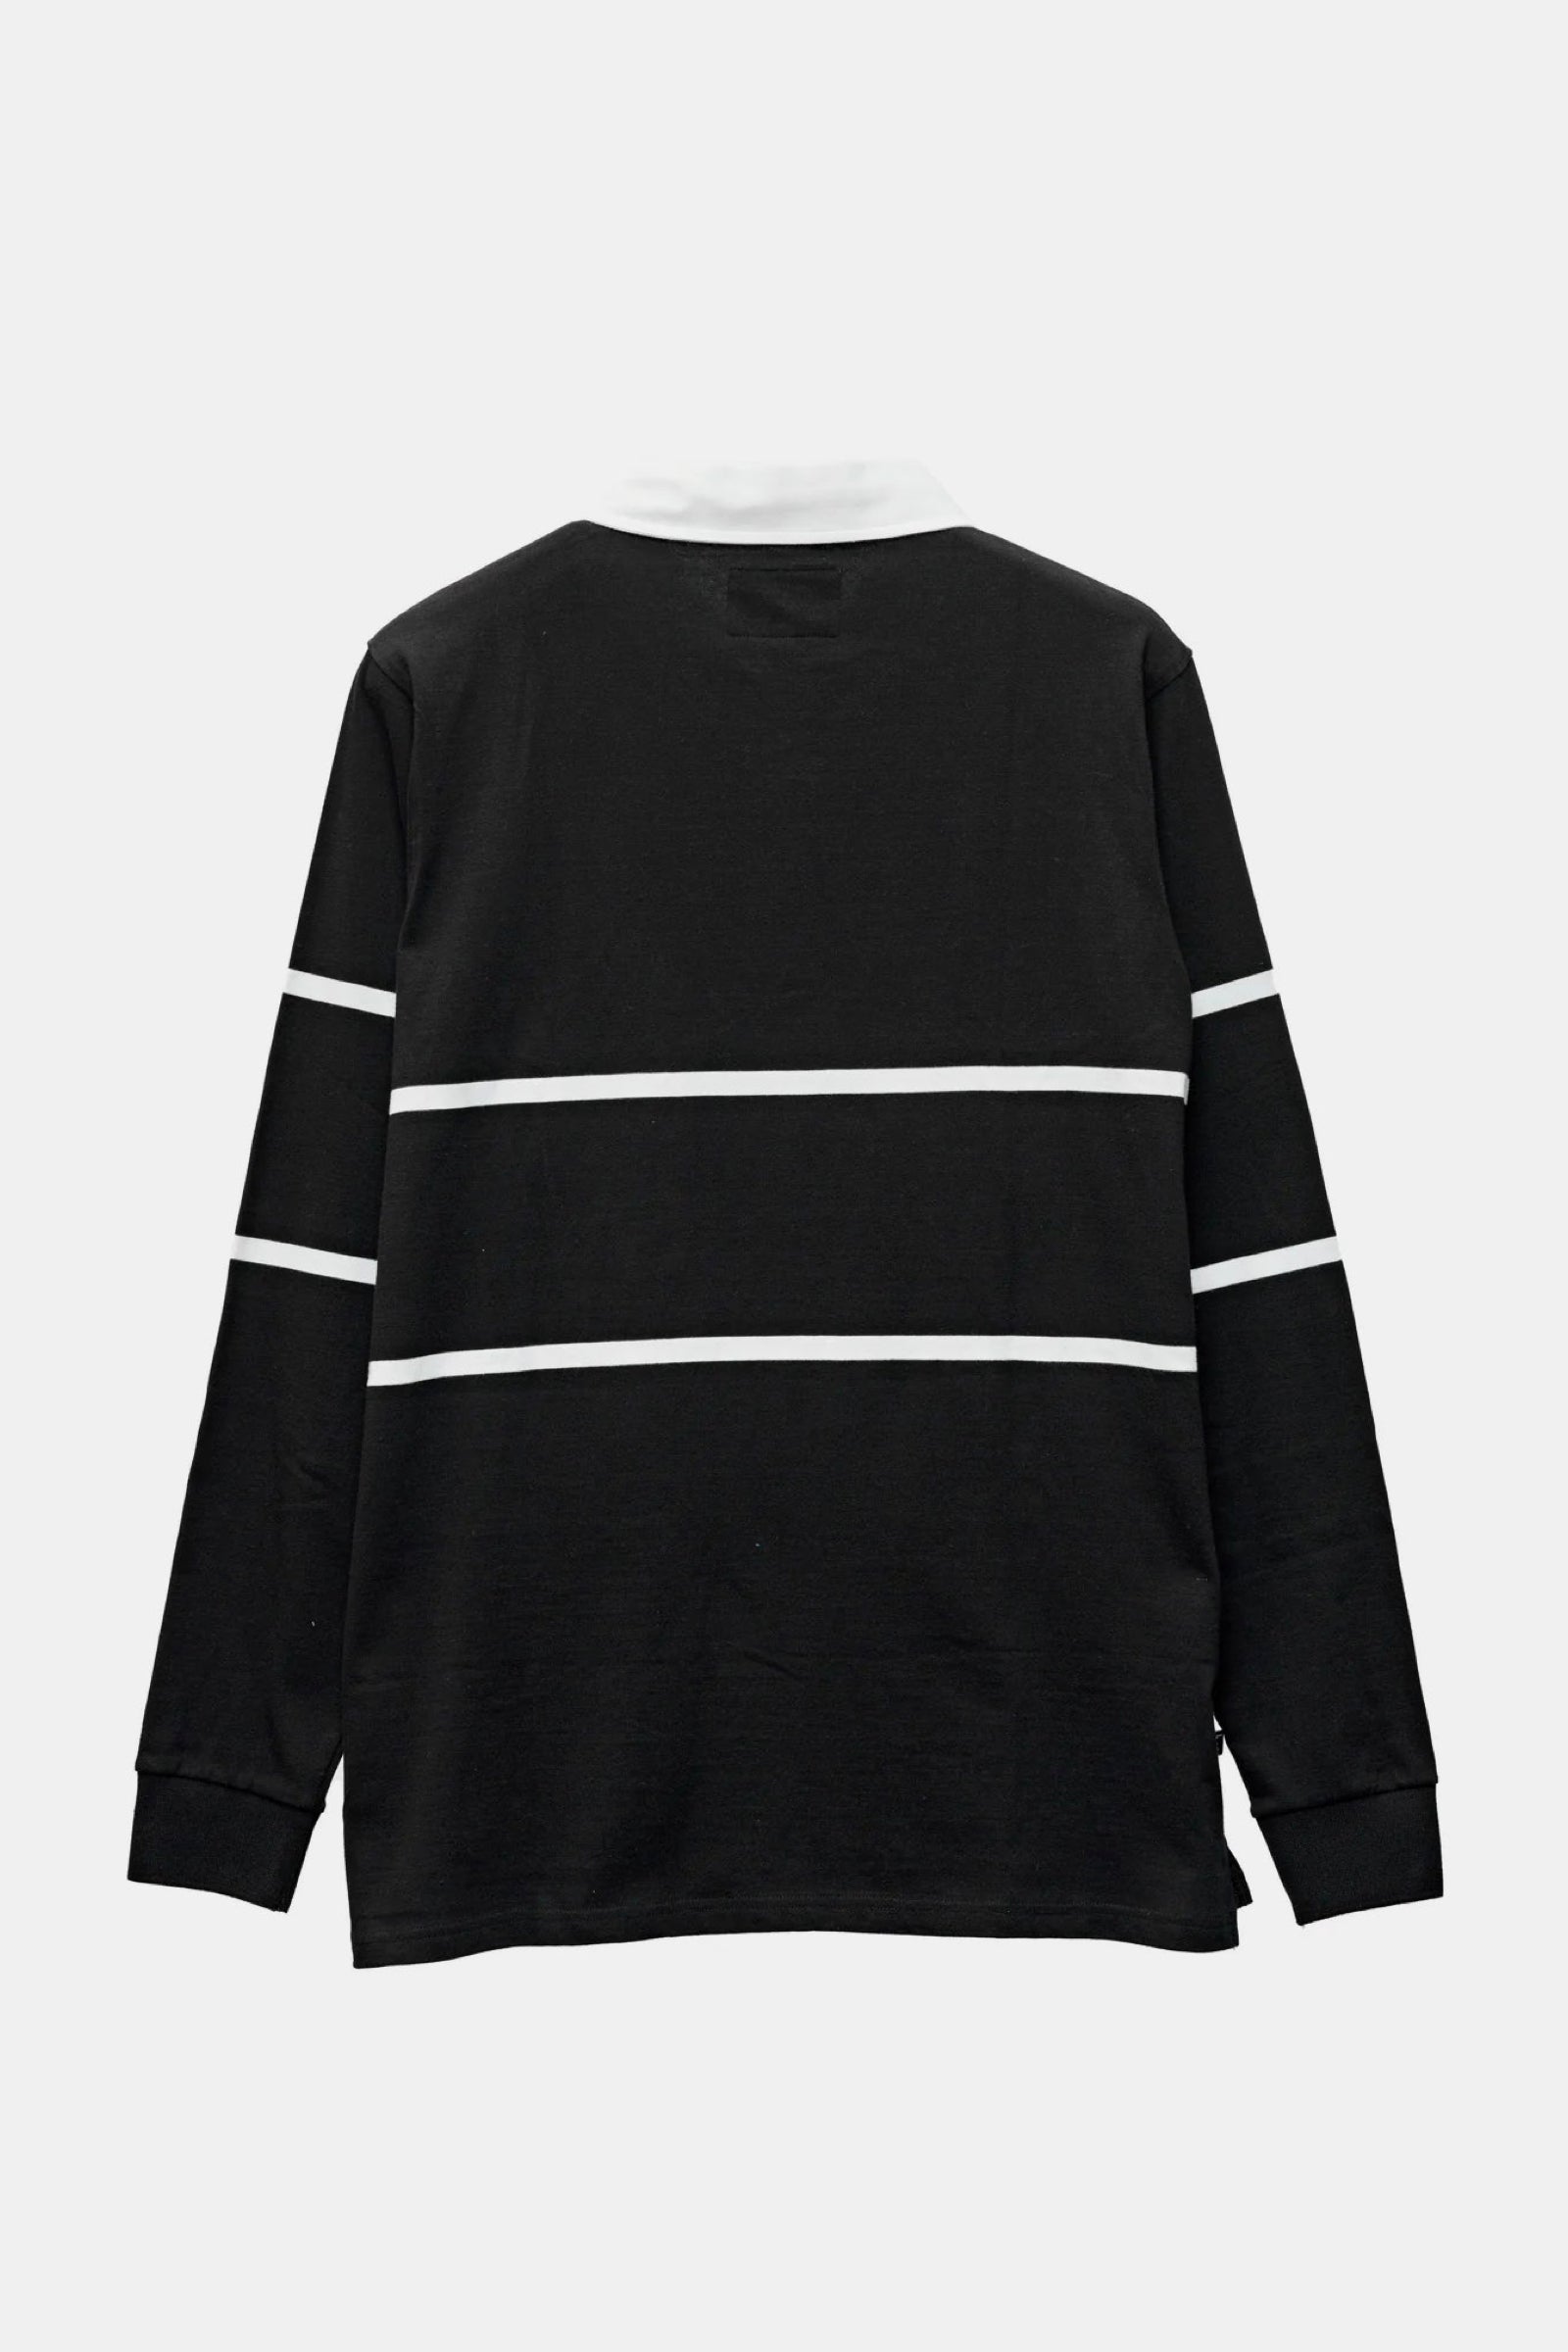 LOWERCASE LS RUGBY - BLACK